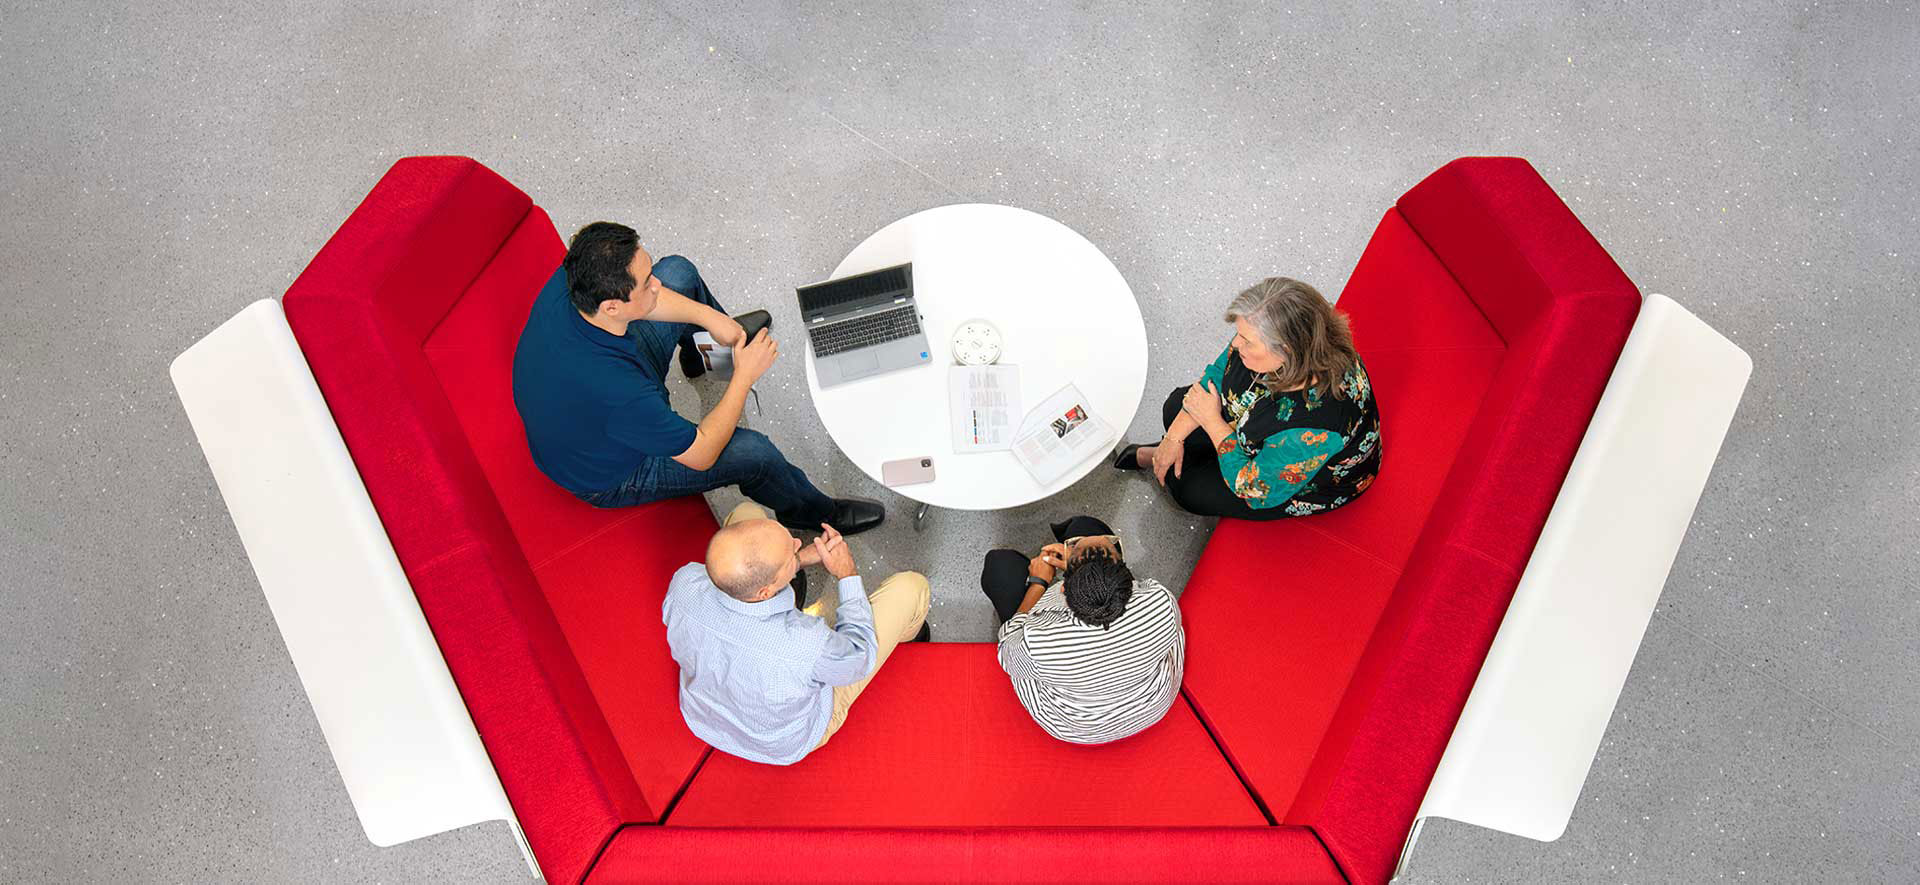 A group of RGA employees gather around a red couch